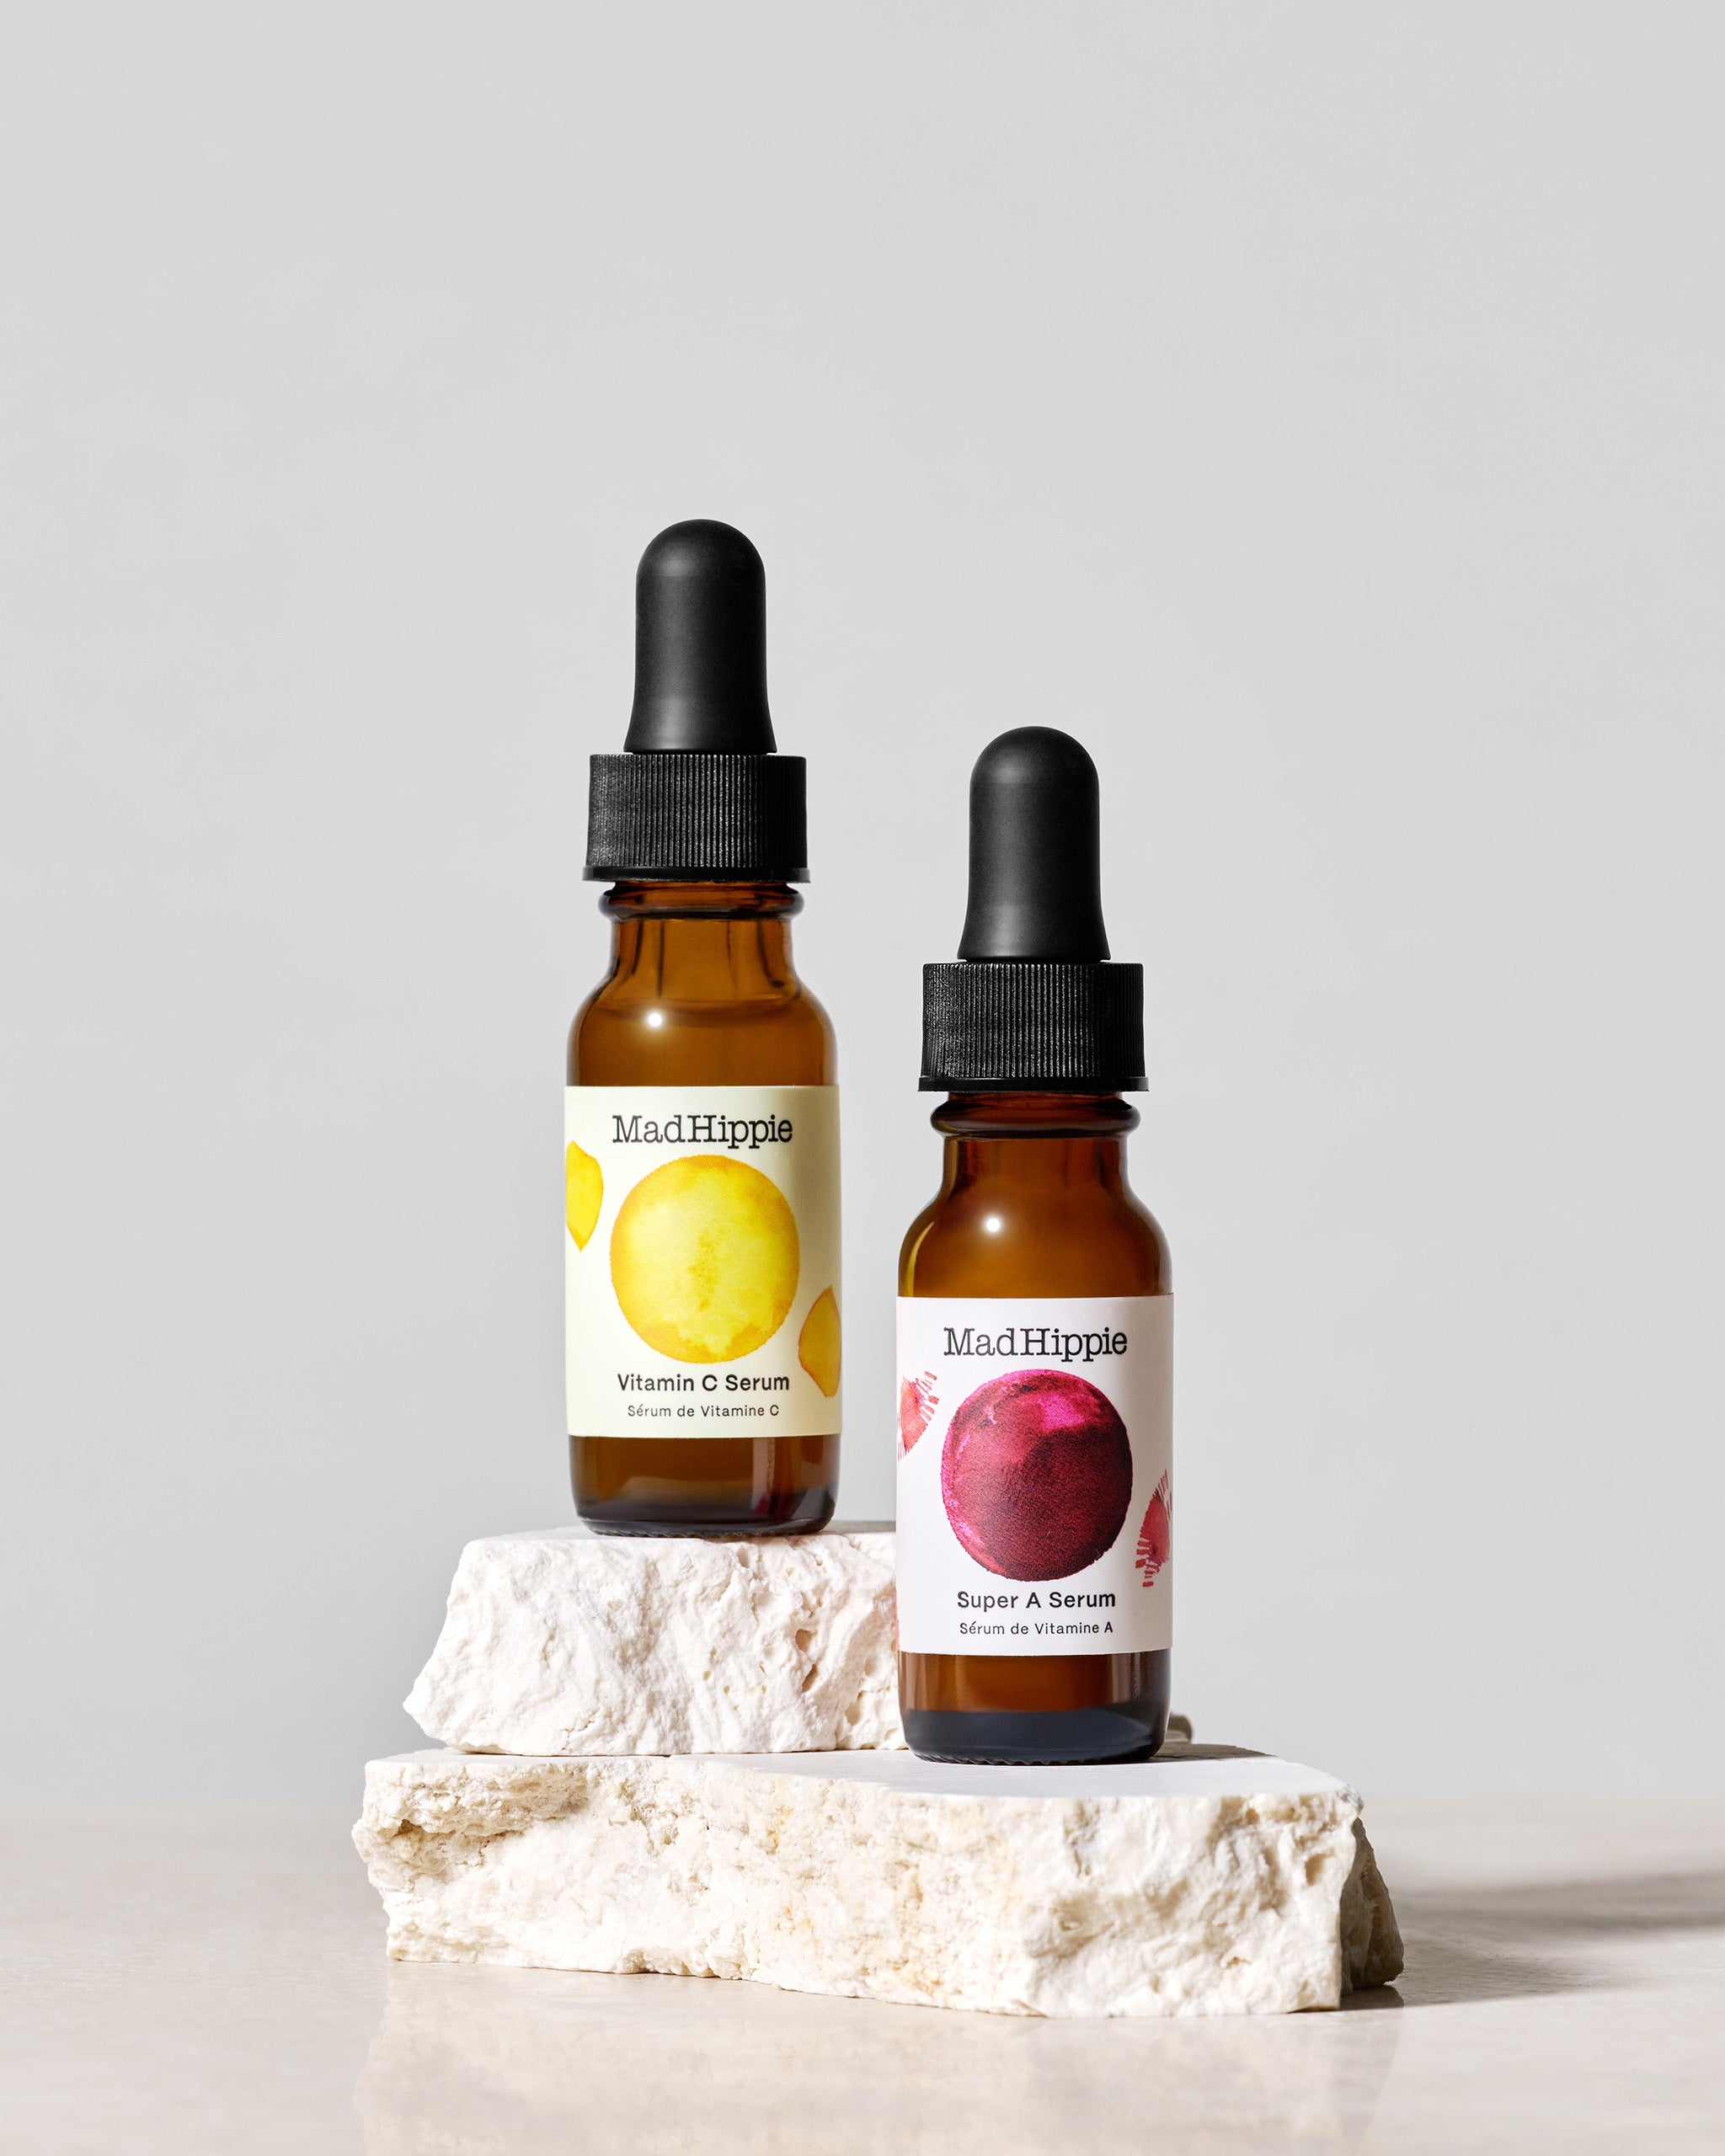 Bottles of Vitamin C Serum + Super A Serum on stone slabs, with gray background